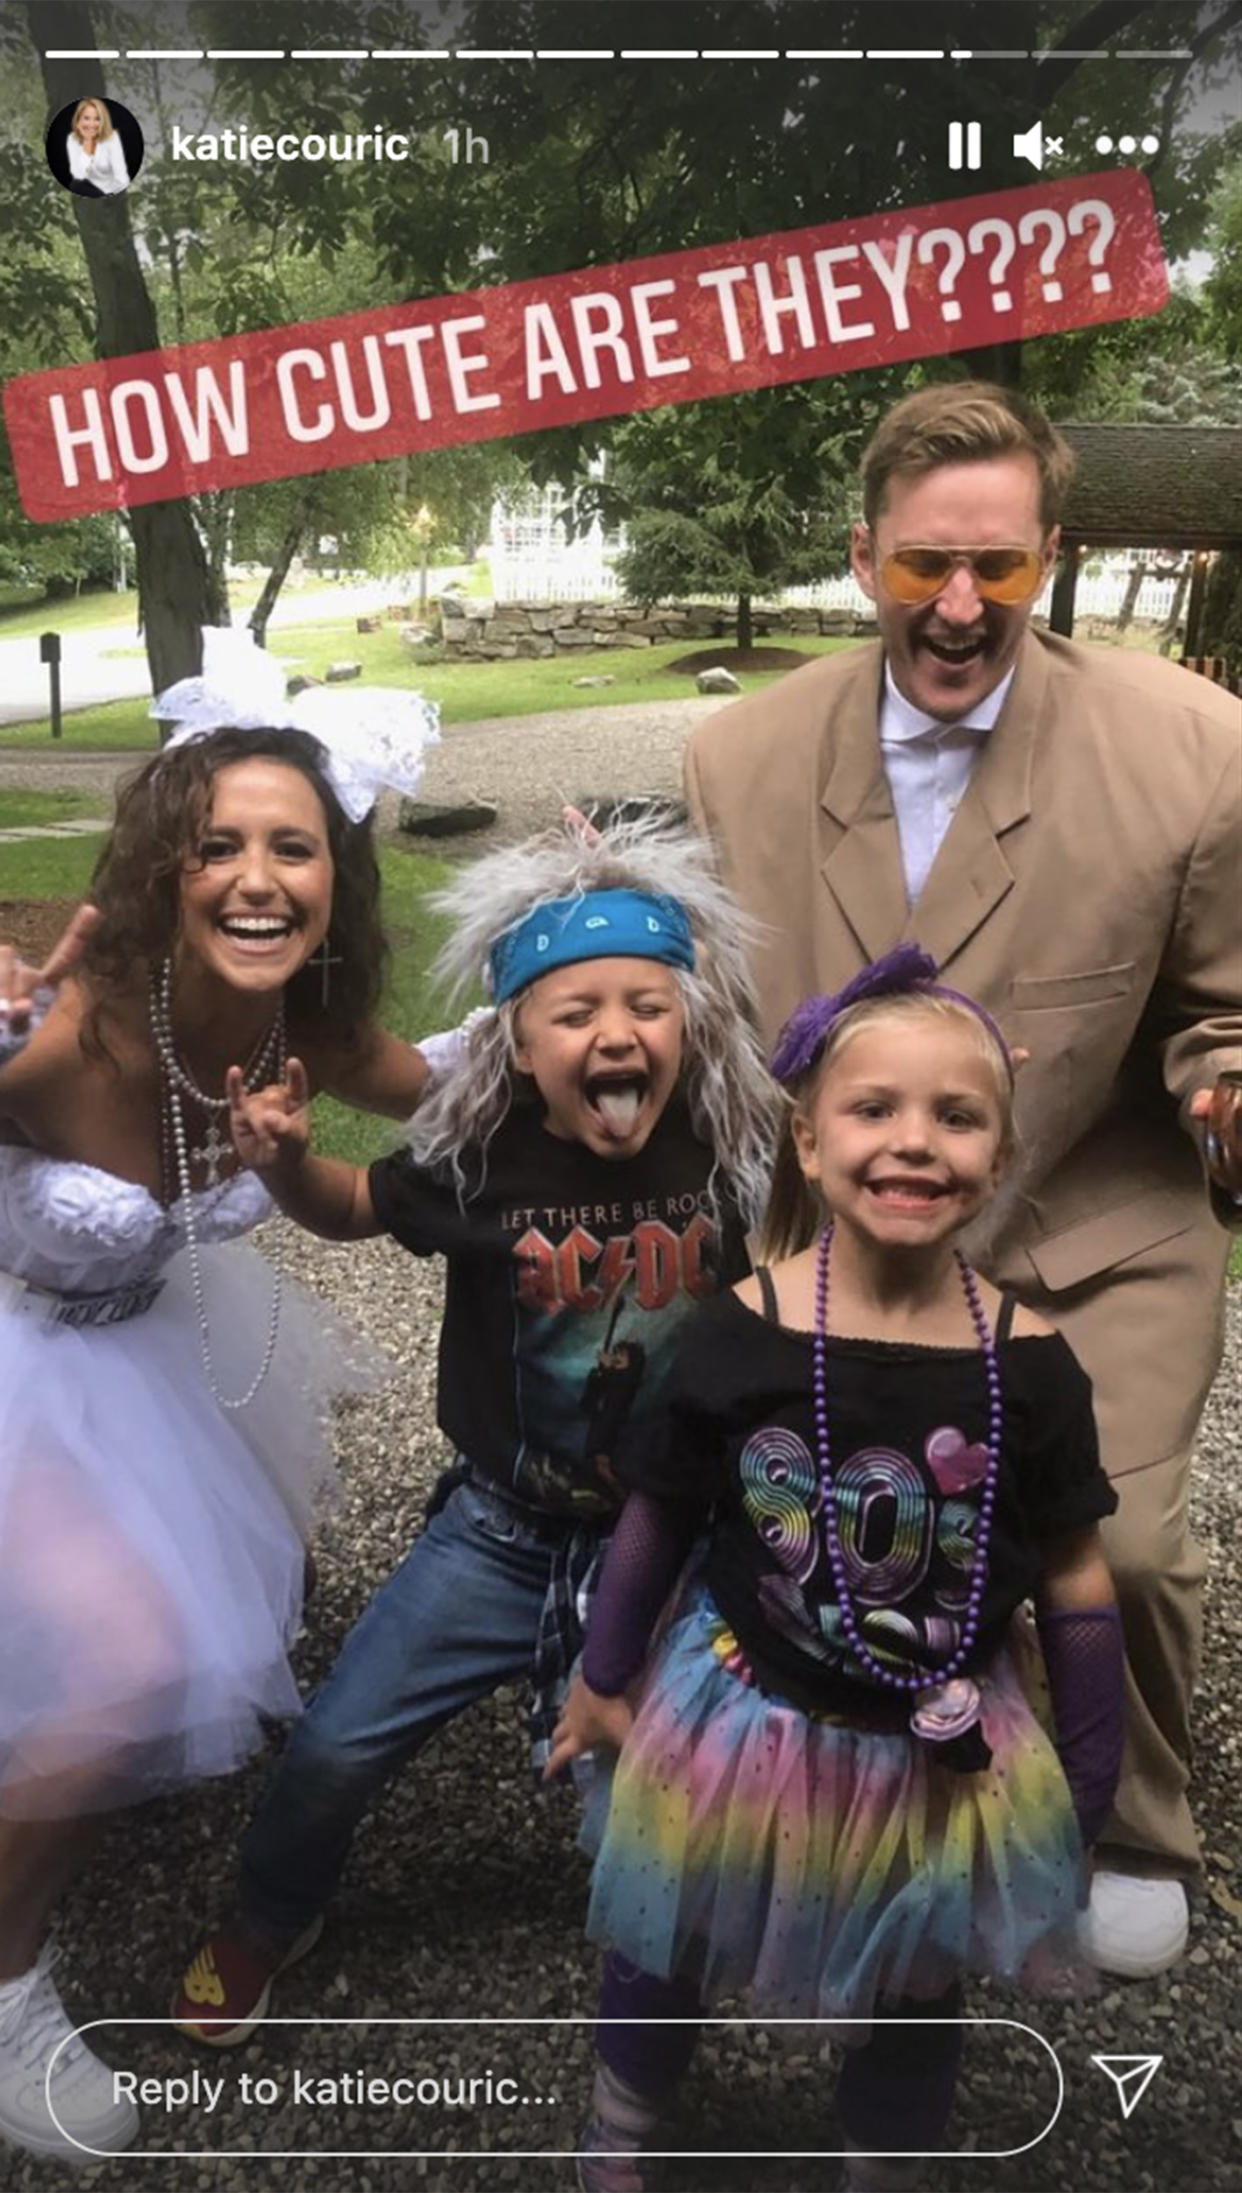 Couric's daughter, Ellie Monahan and her groom-to-be, Mark Dobrosky, posed with costumed kids at the party, which took place during their wedding weekend. (katiecouric/Instagram)